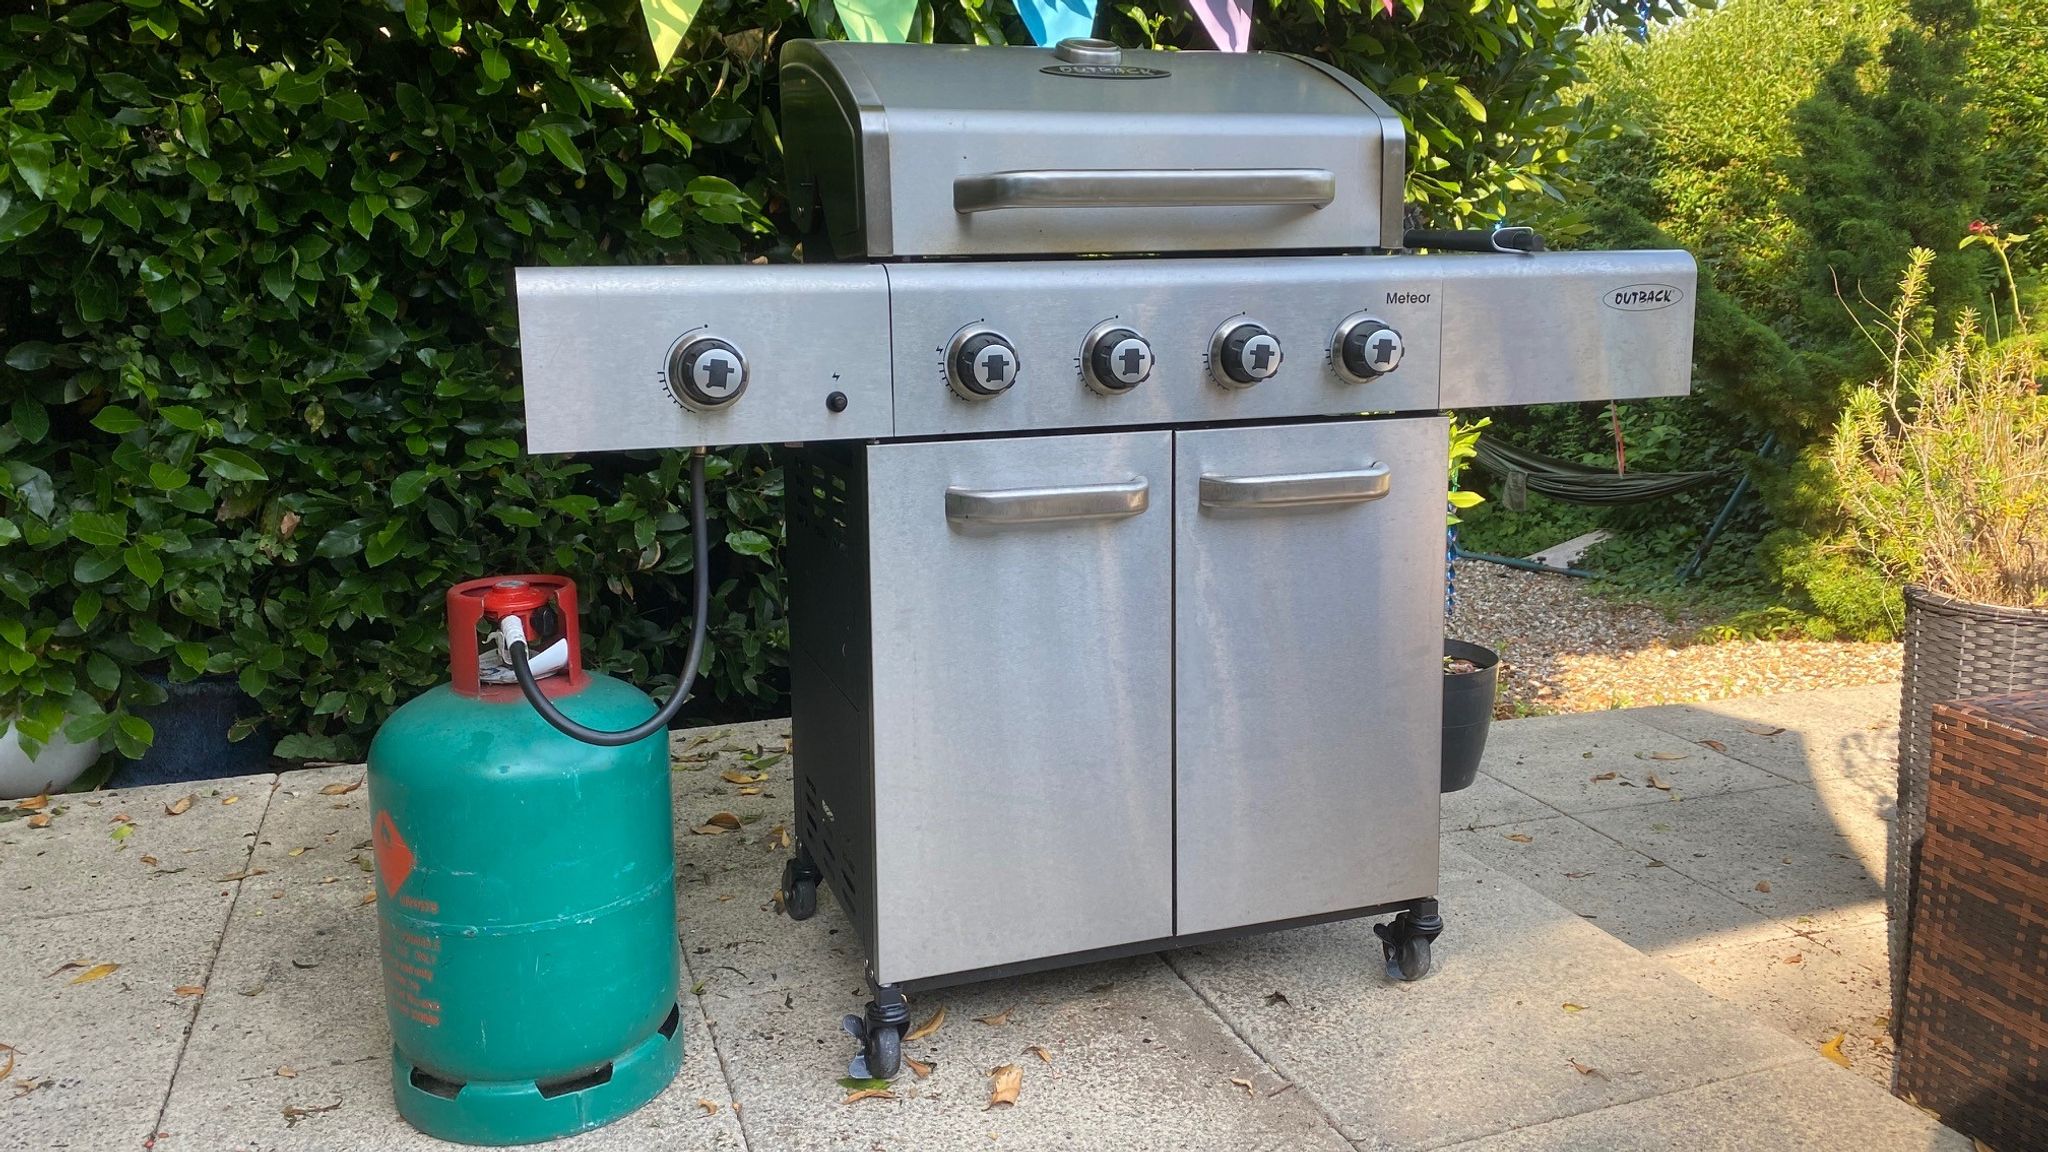 Barbecues threatened as gas cylinder shortage 'exacerbated by